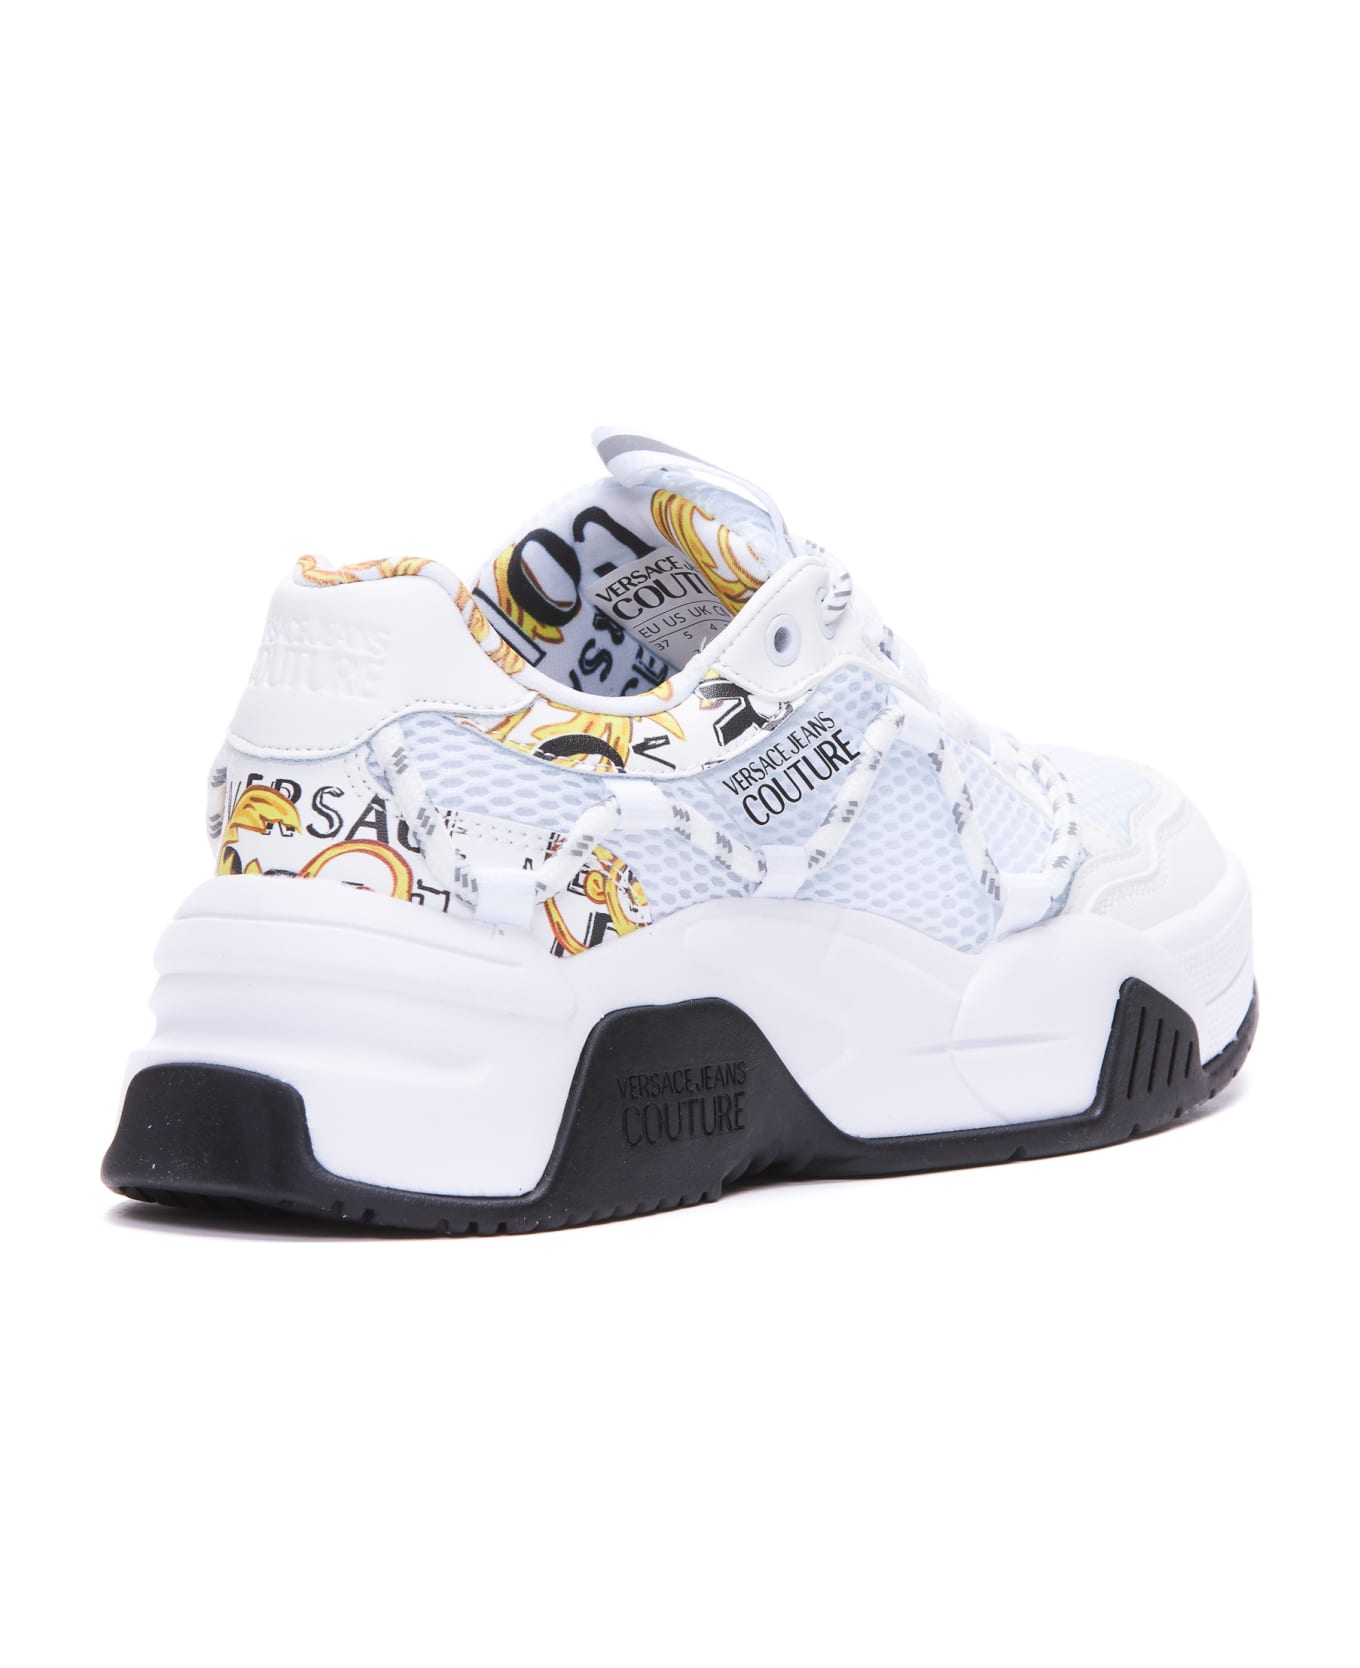 Versace Jeans Couture Shoes - WHITE/GOLD